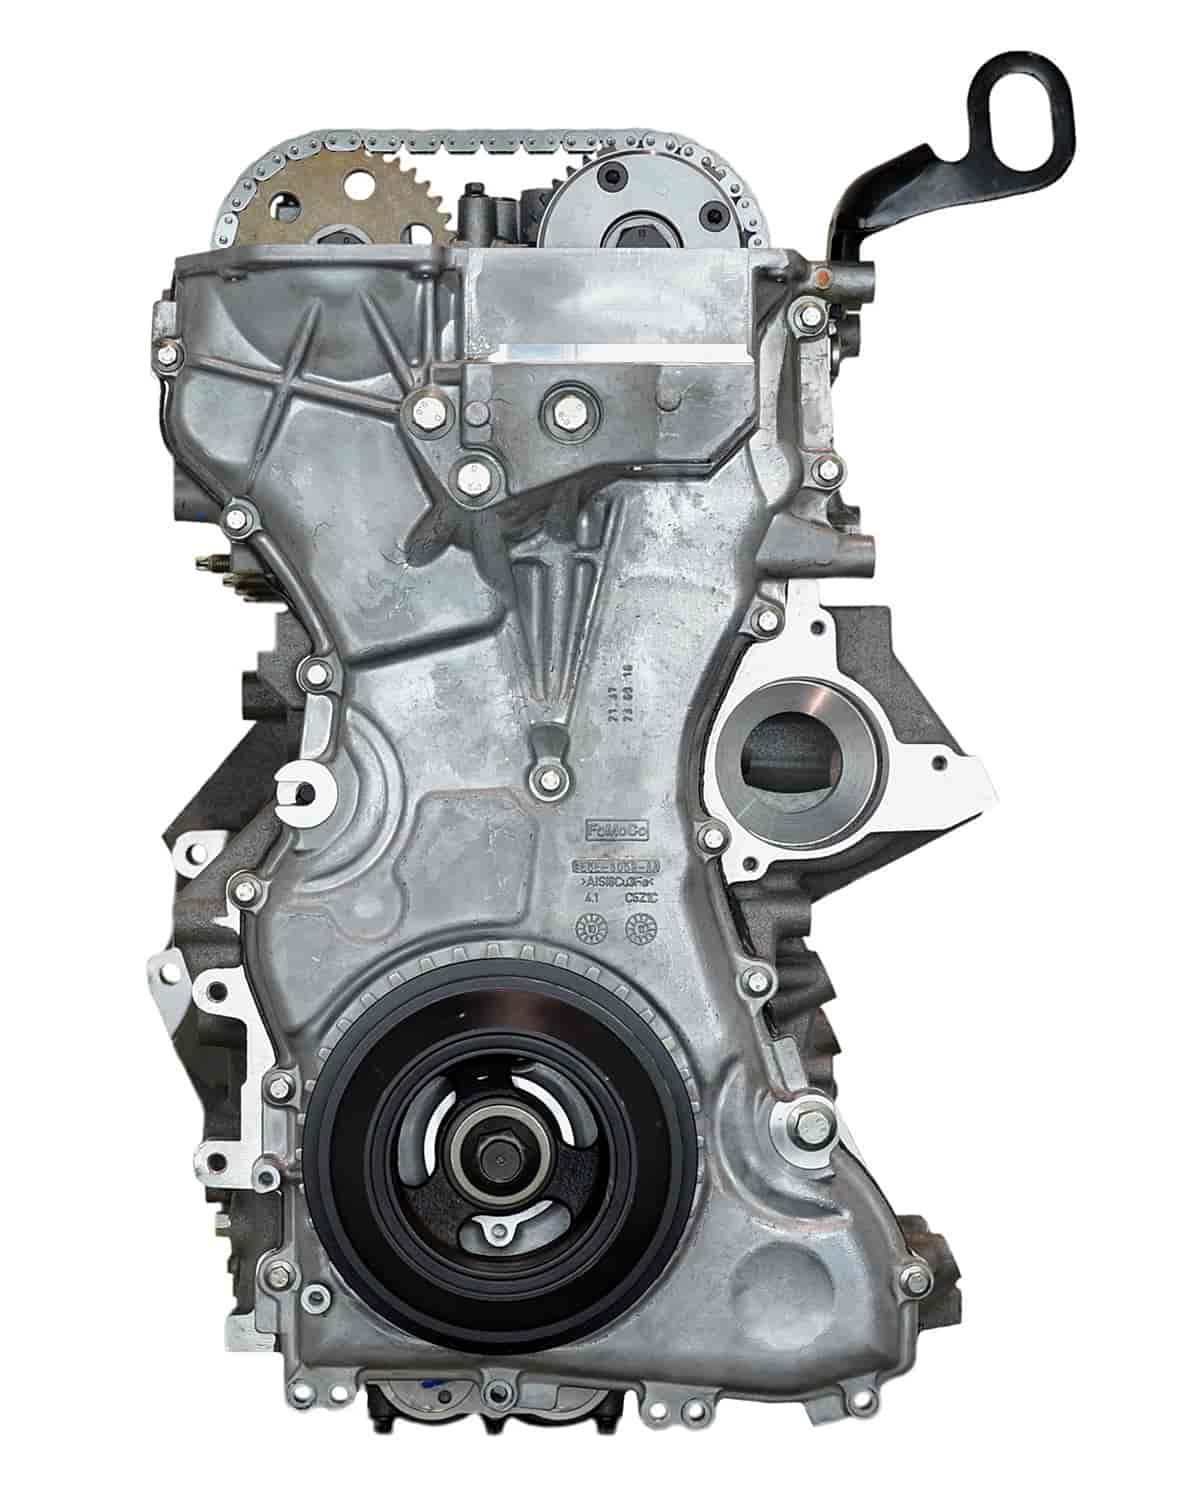 Remanufactured Crate Engine for 2009-2012 Ford Escape & Fusion with 2.5L L4